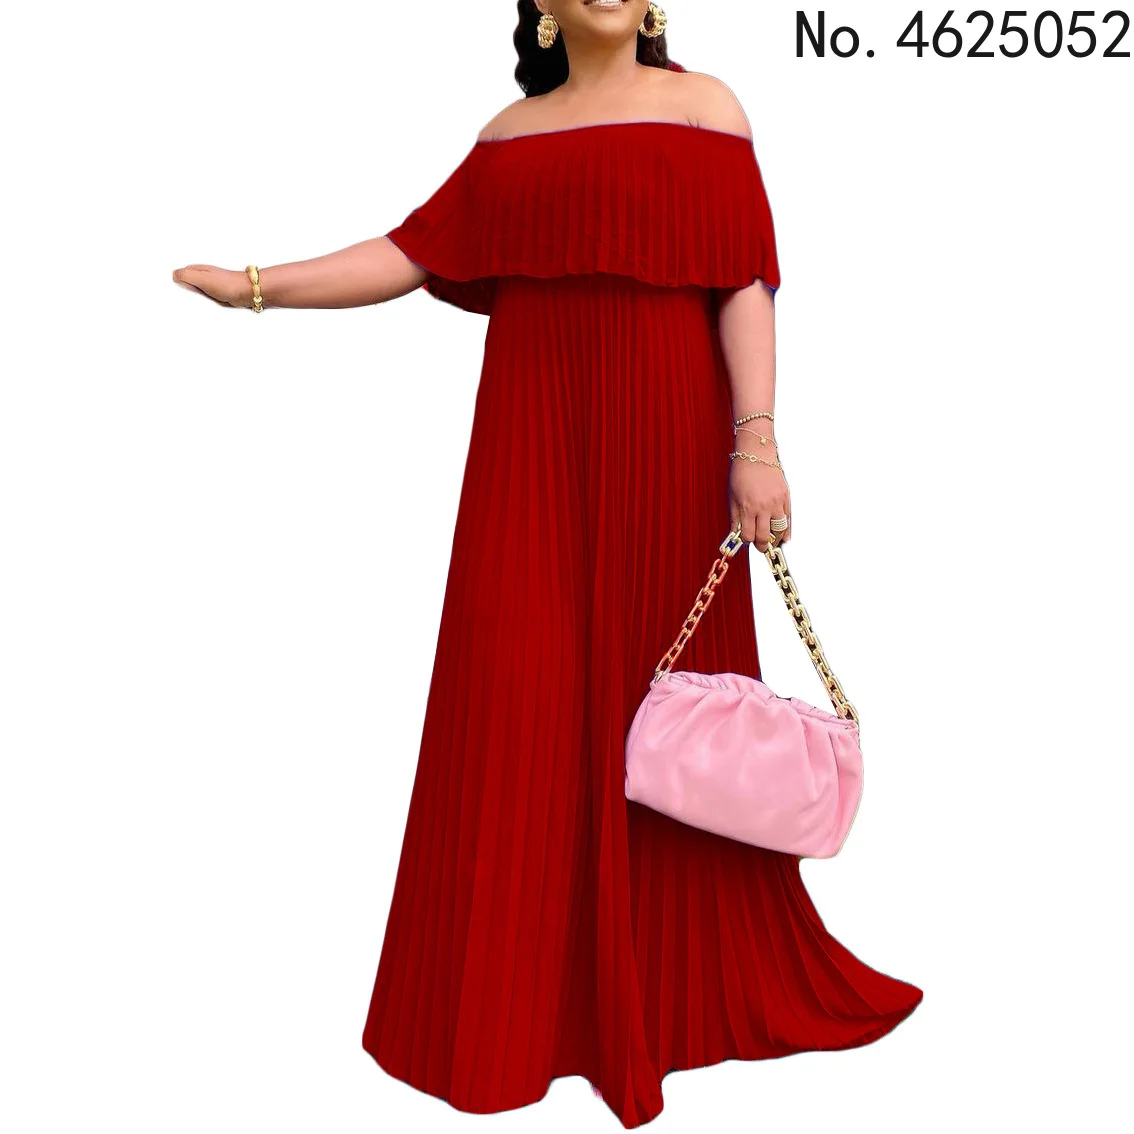 

Robes African Dress Women Ruffle Splice Flare Sleeve Empire Gown Summer Solid Fashion Pleated African Office Lady Dress Vestidos